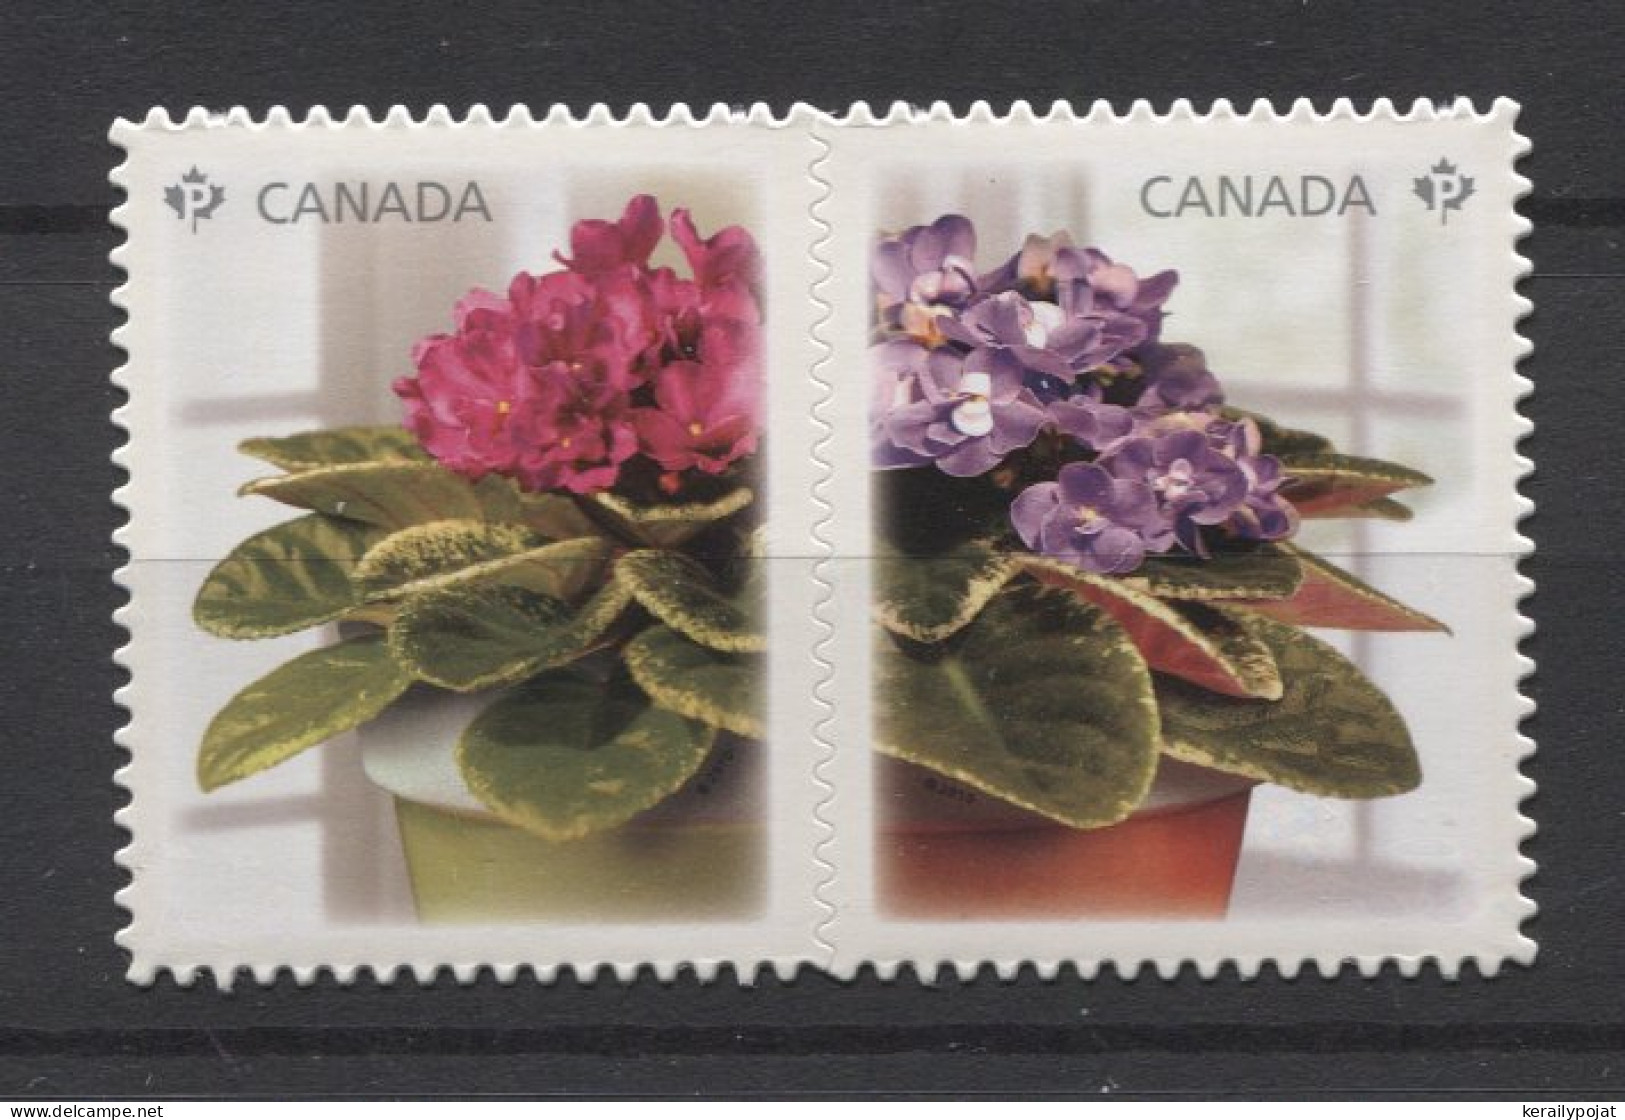 Canada - 2010 African Violets Self-adhesive__(TH-24847) - Neufs